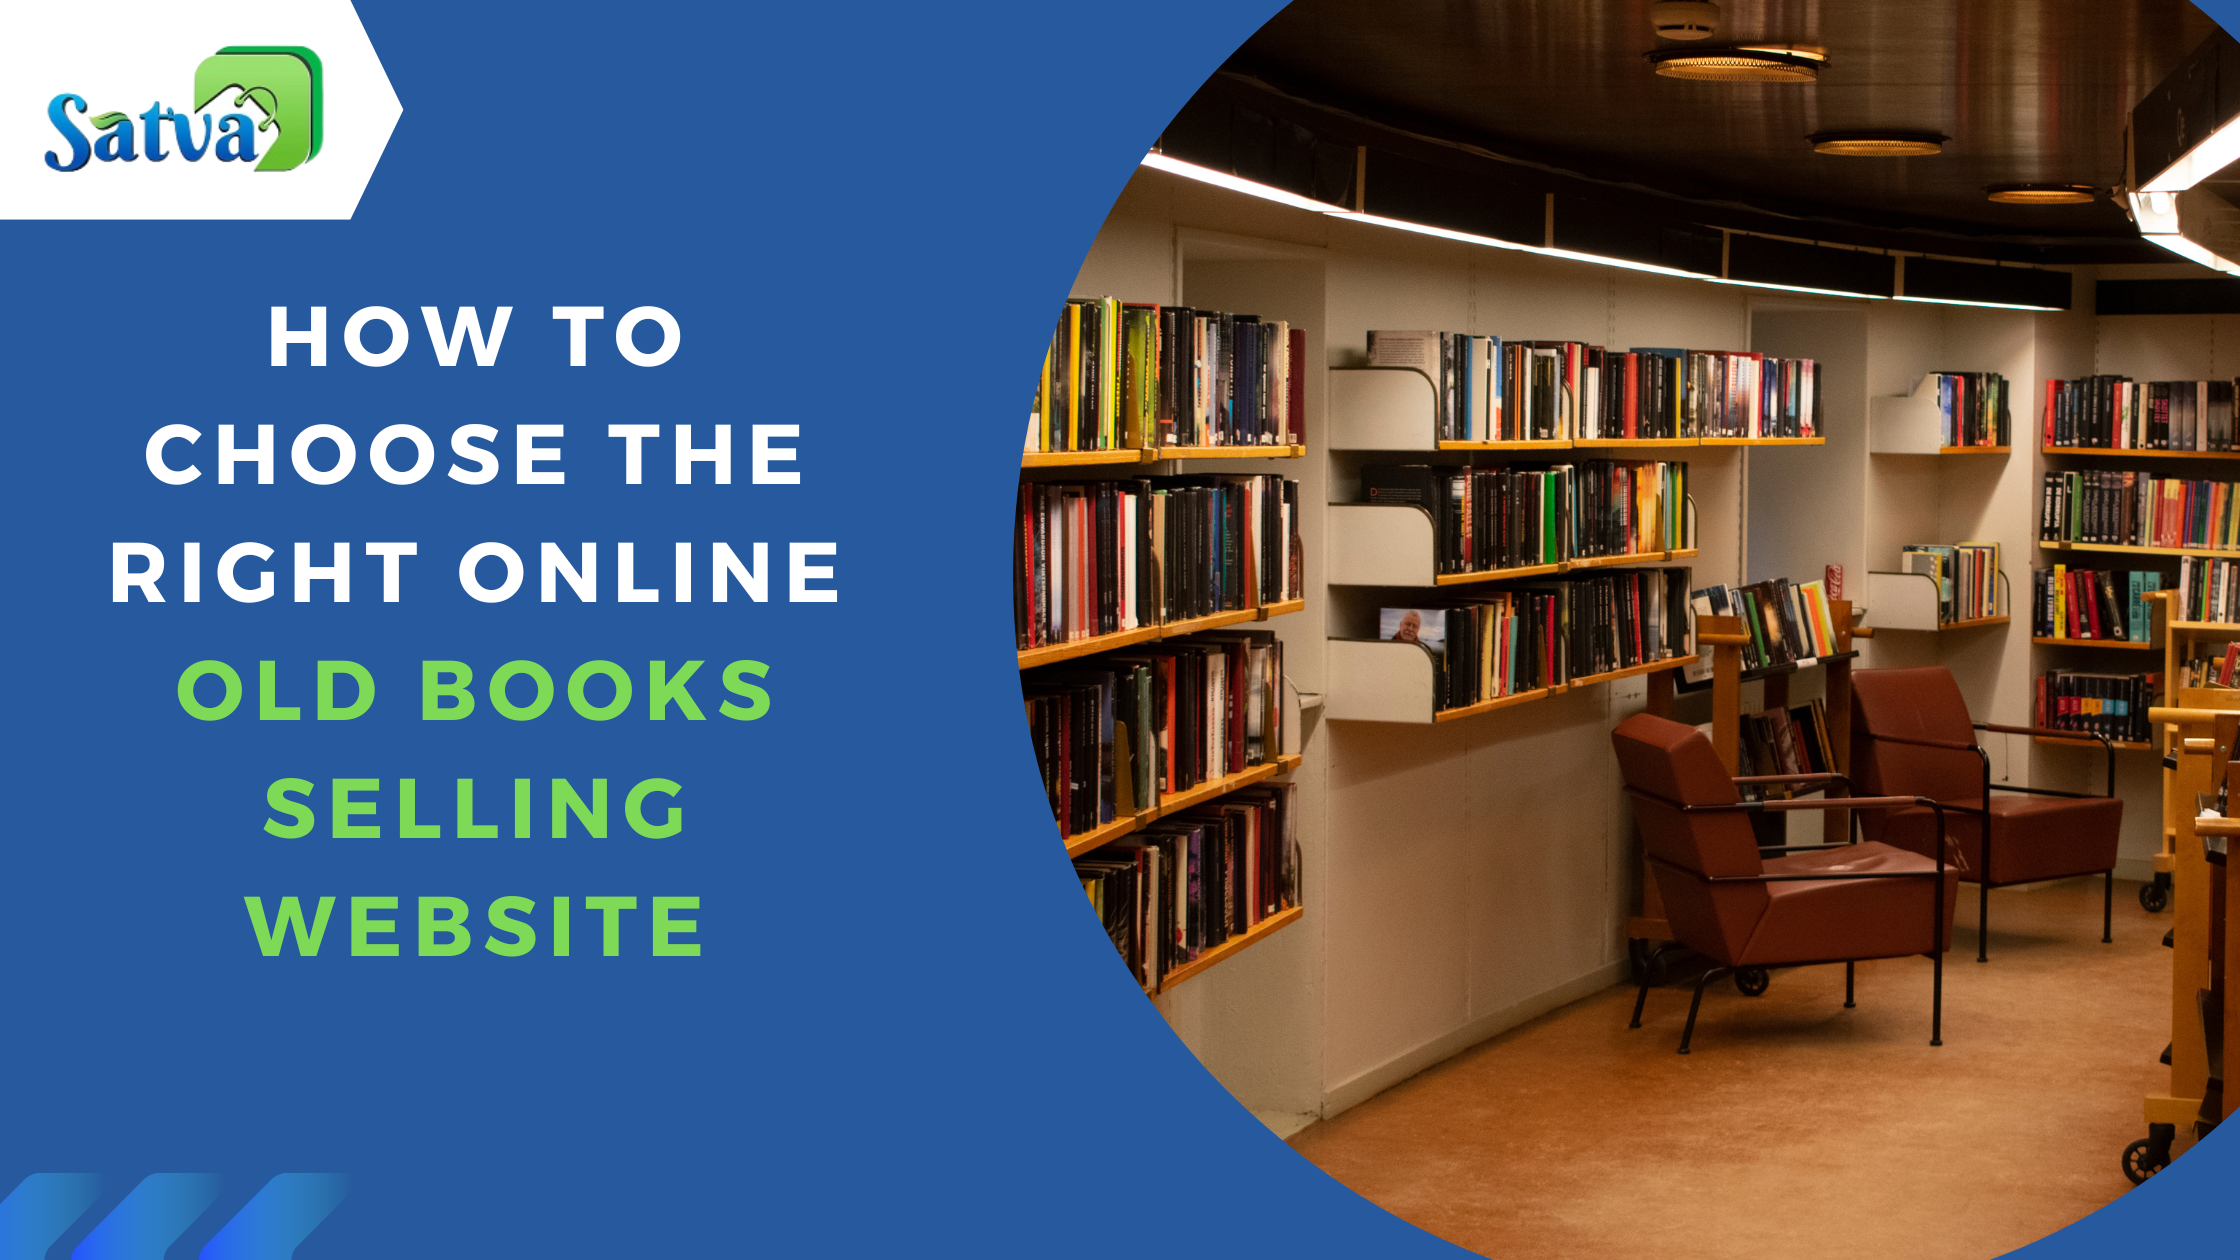 Learn how to choose the right online platform for selling your old books and earn extra cash. Satva Online Pvt Ltd. offers hassle-free selling, competitive fees, and excellent customer support. List your books, set your prices, and wait for interested buyers to contact you. Start decluttering your bookshelf today